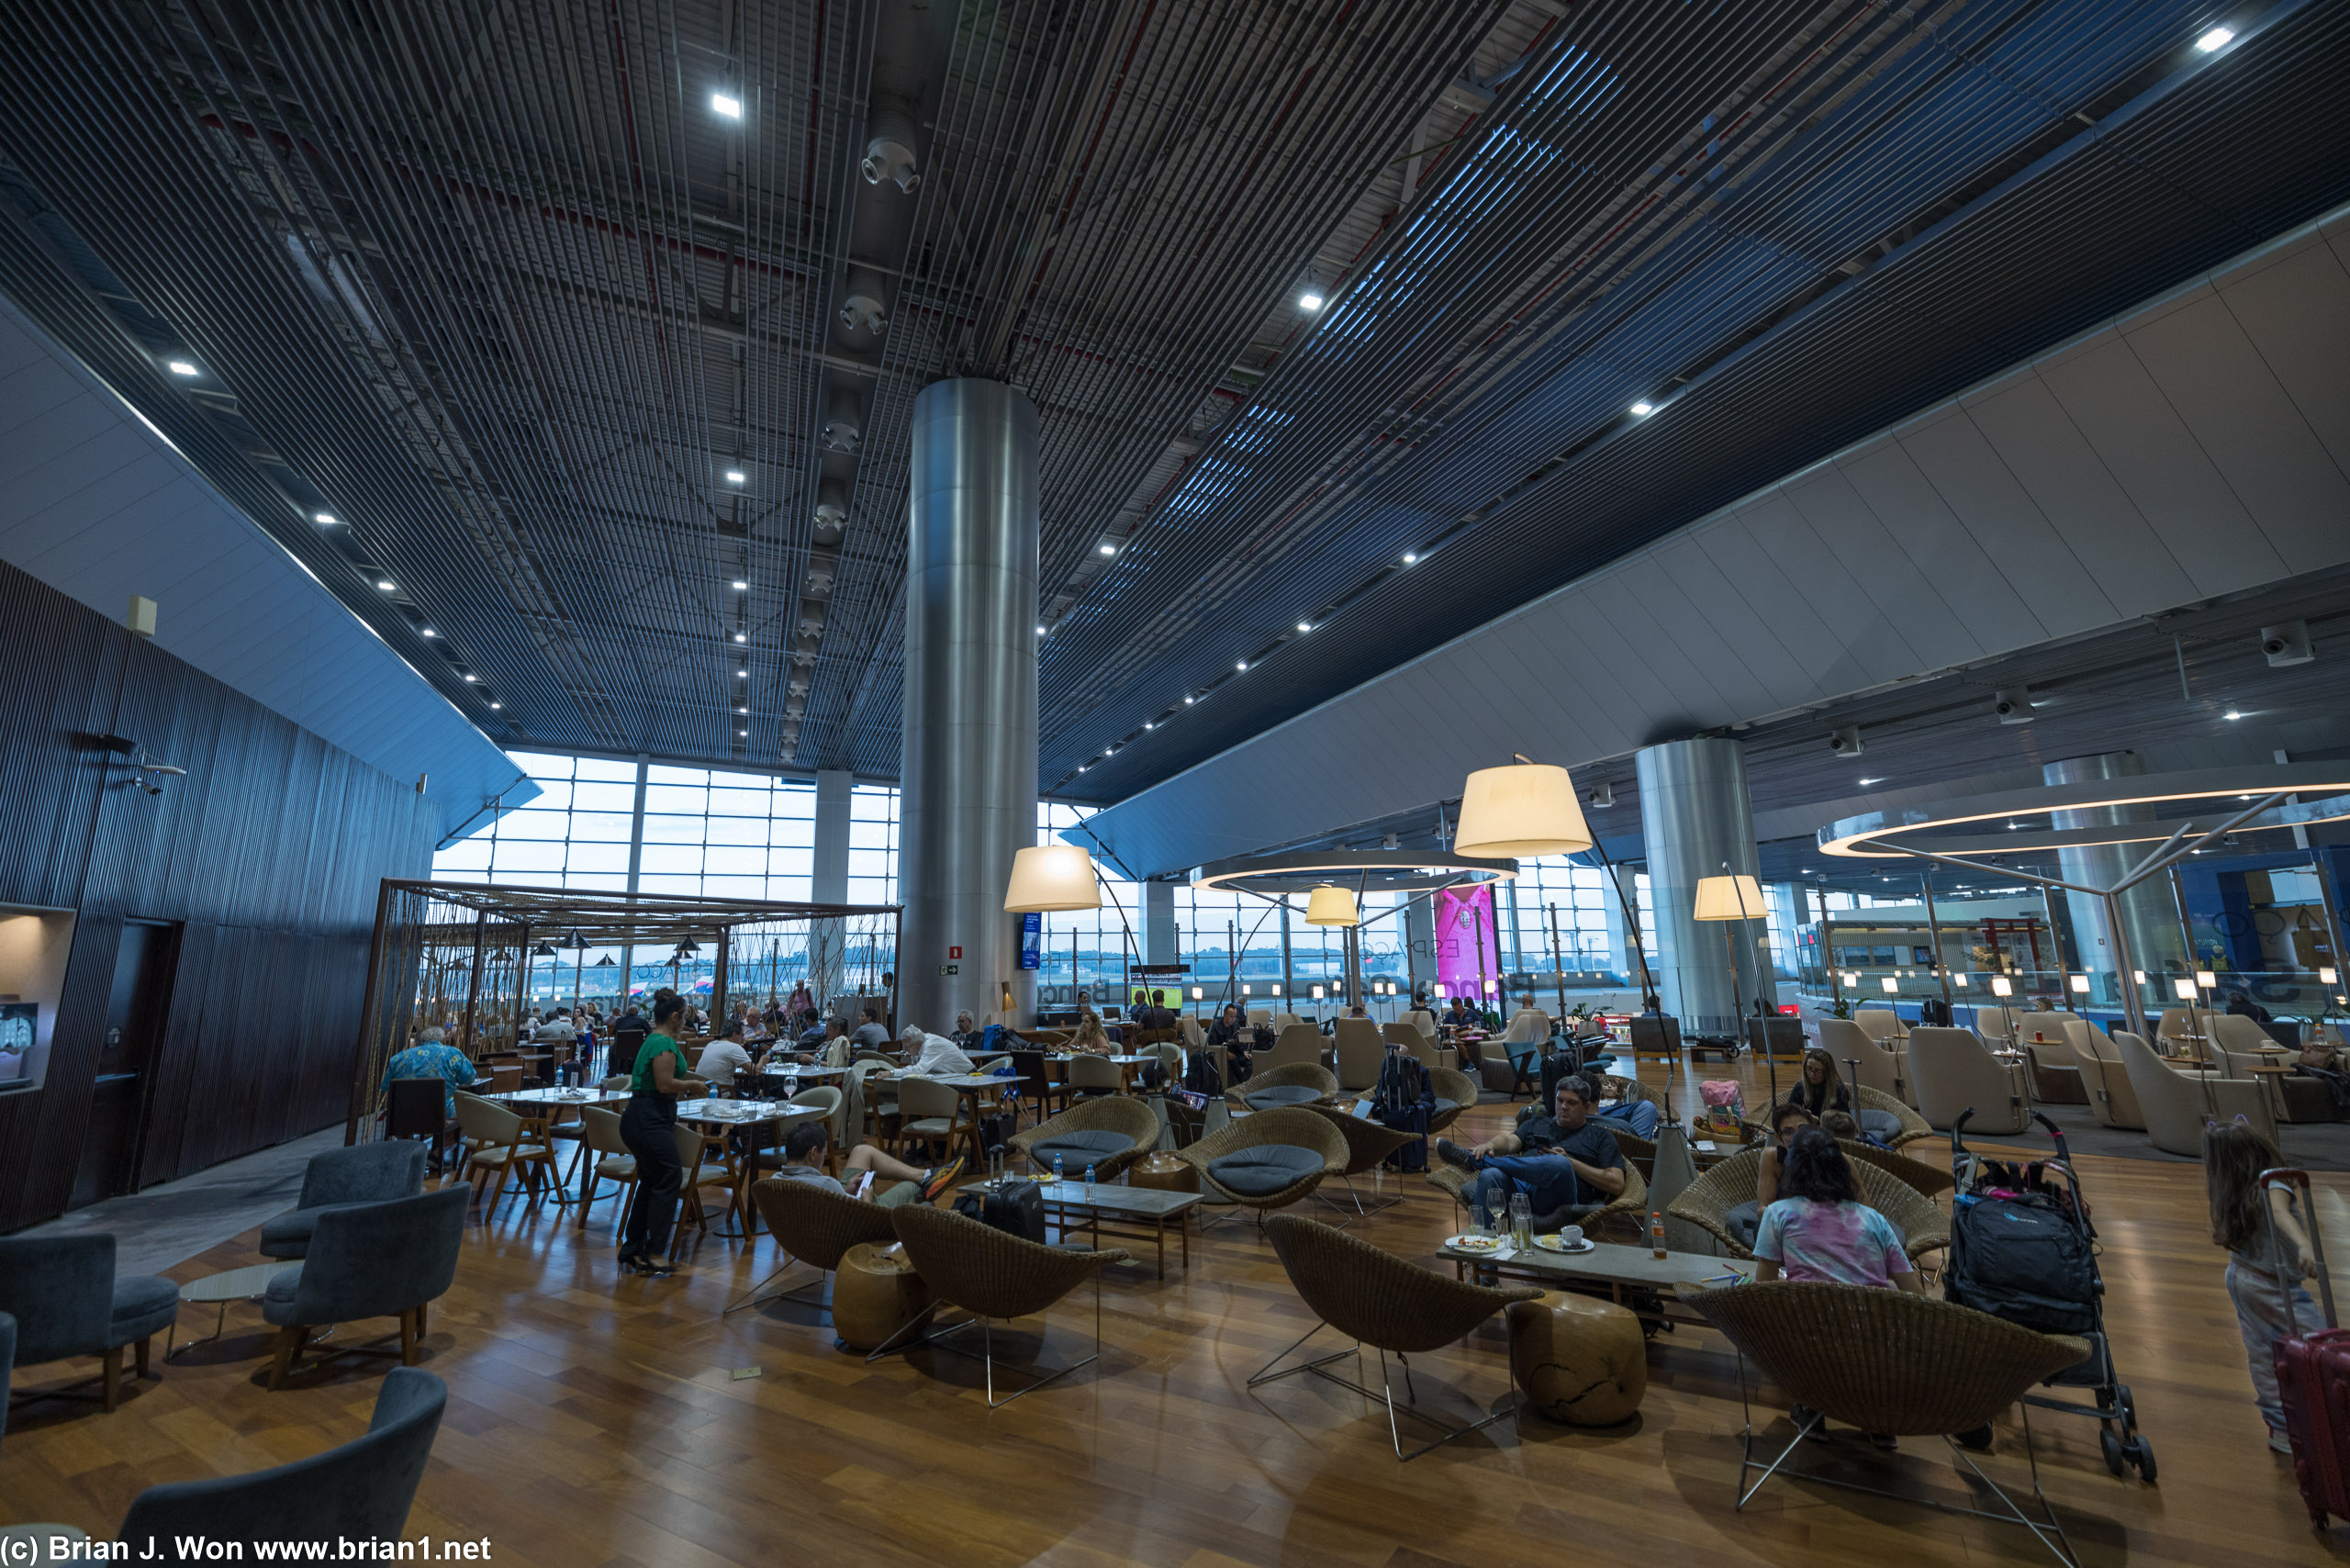 It's a big lounge that takes full advantage of the airport's high ceilings.